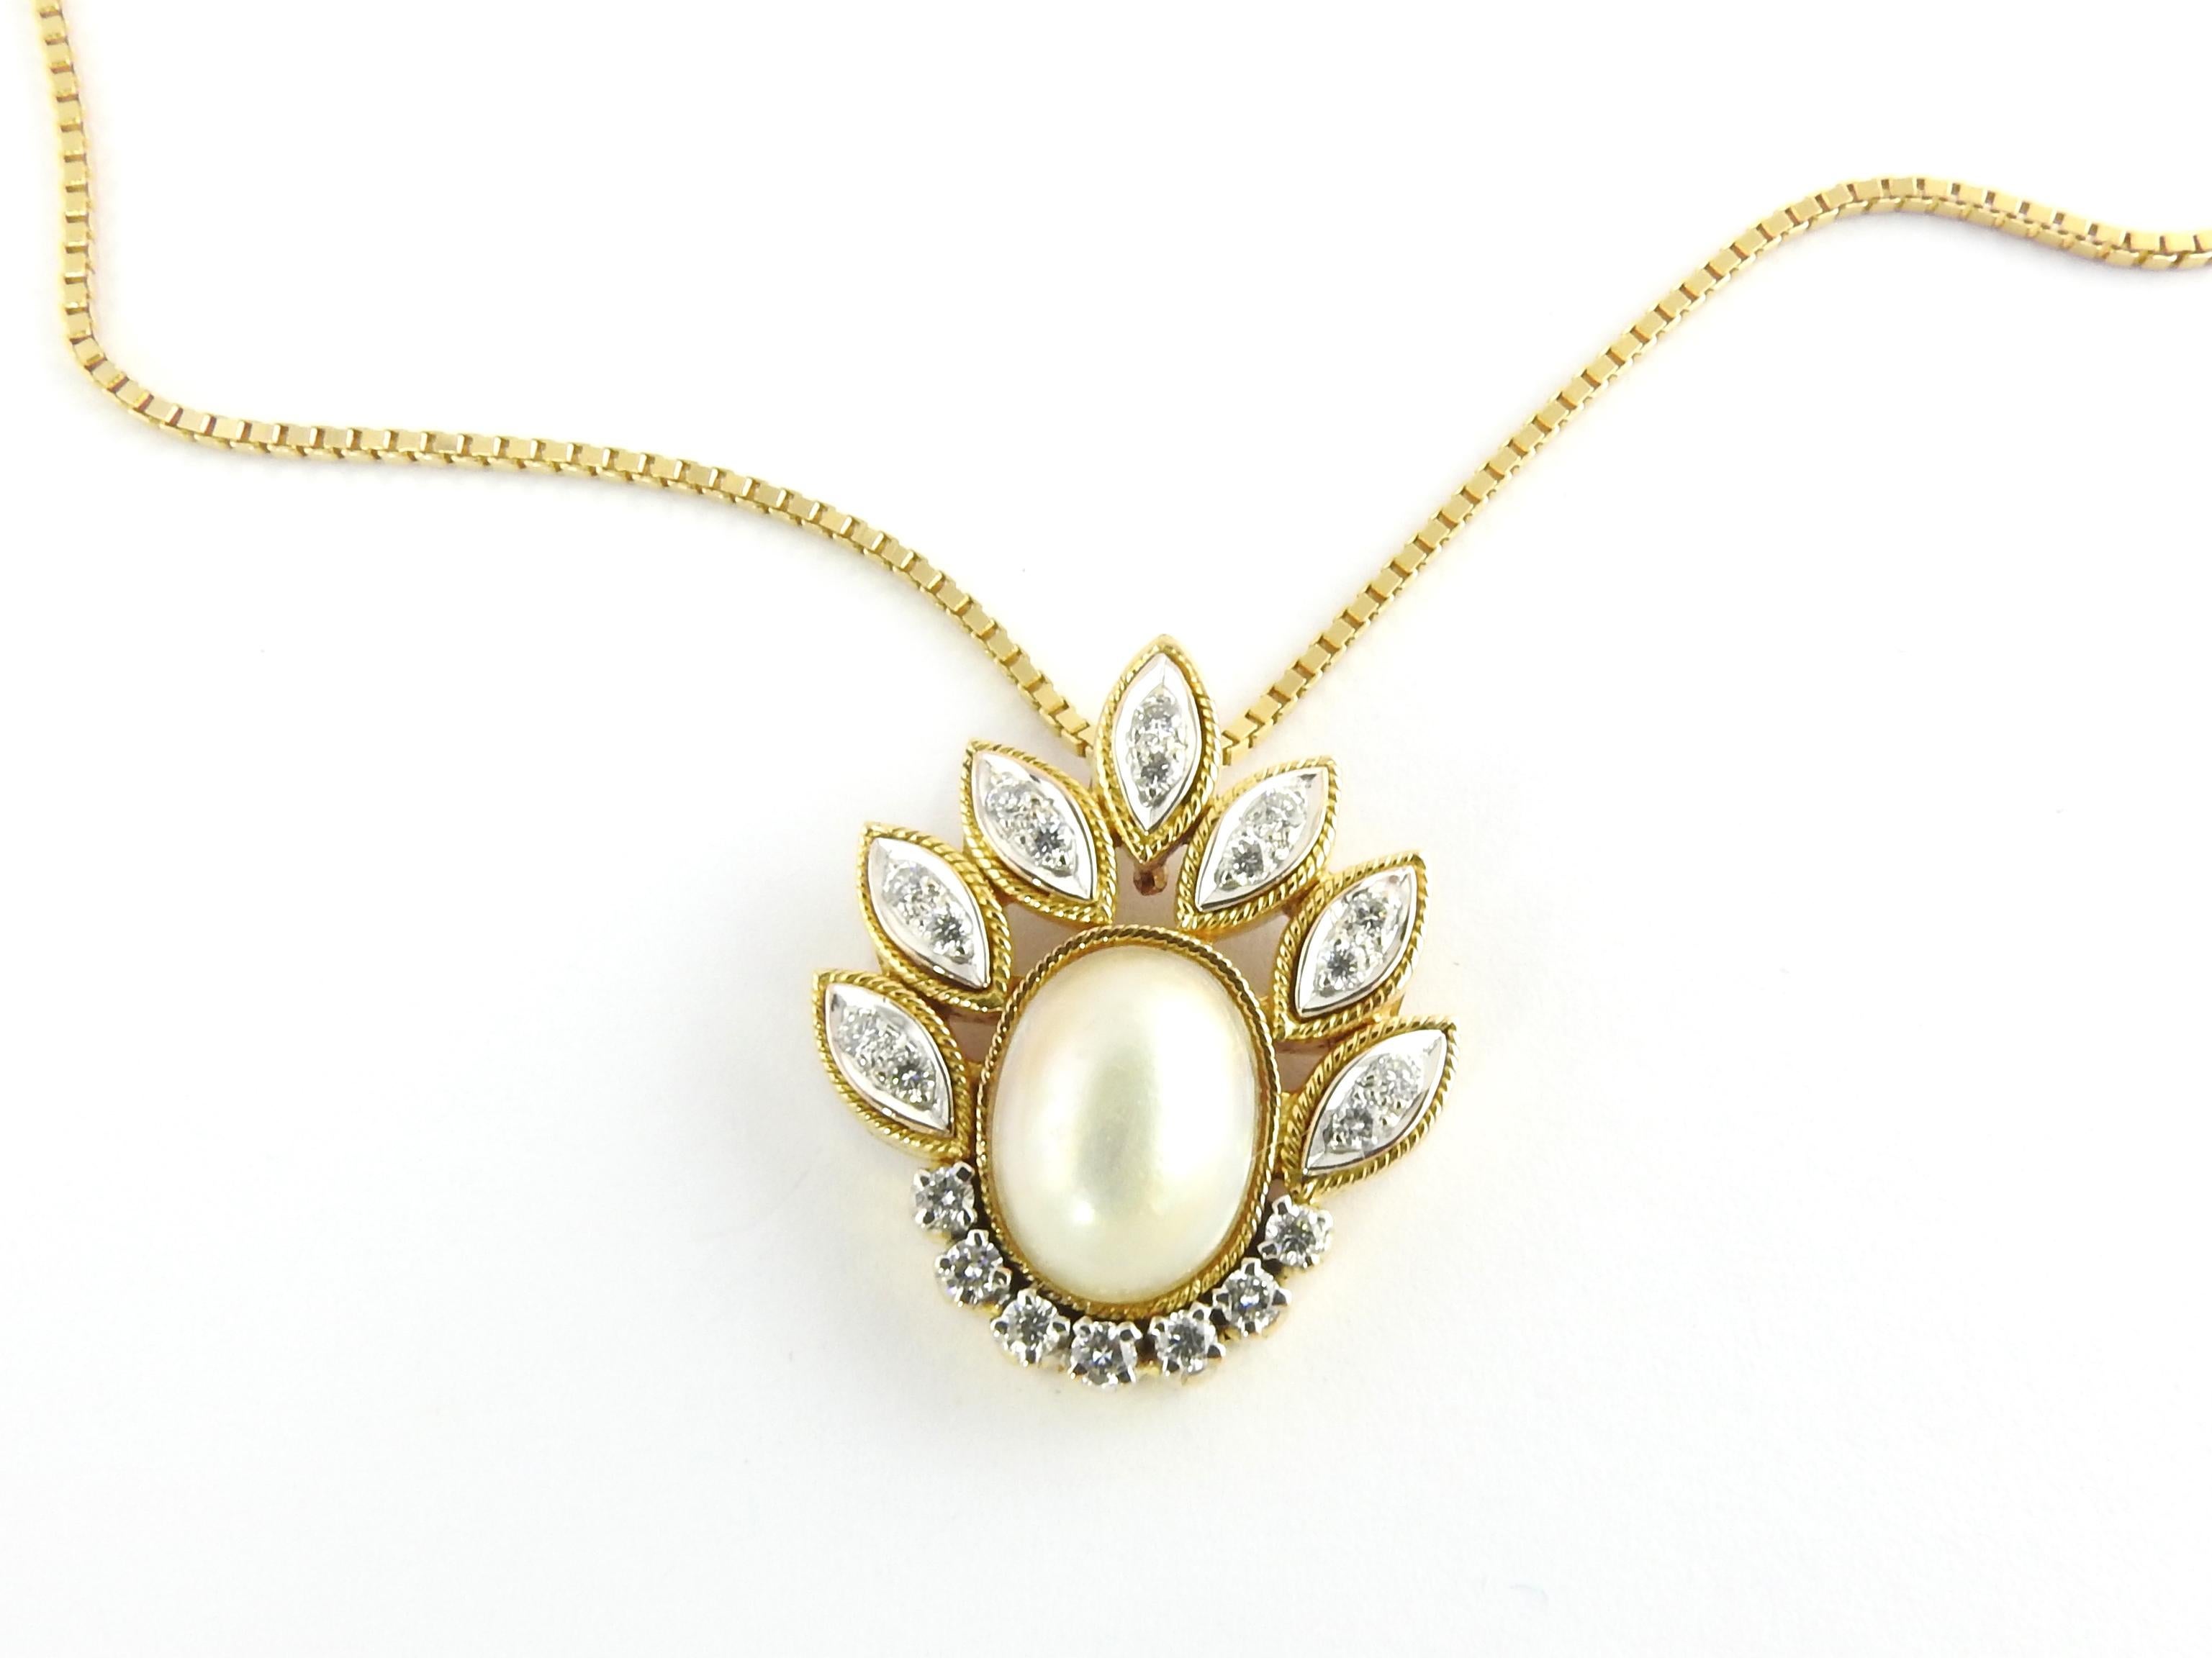 14 Karat Yellow Gold Mabe Pearl and Diamond Pendant Necklace-

This lovely pendant features one oval Mabe pearl (11 mm x 9 mm) accented with 21 round brilliant cut diamonds set in beautifully detailed 14K yellow gold.  Suspends from a classic 14K